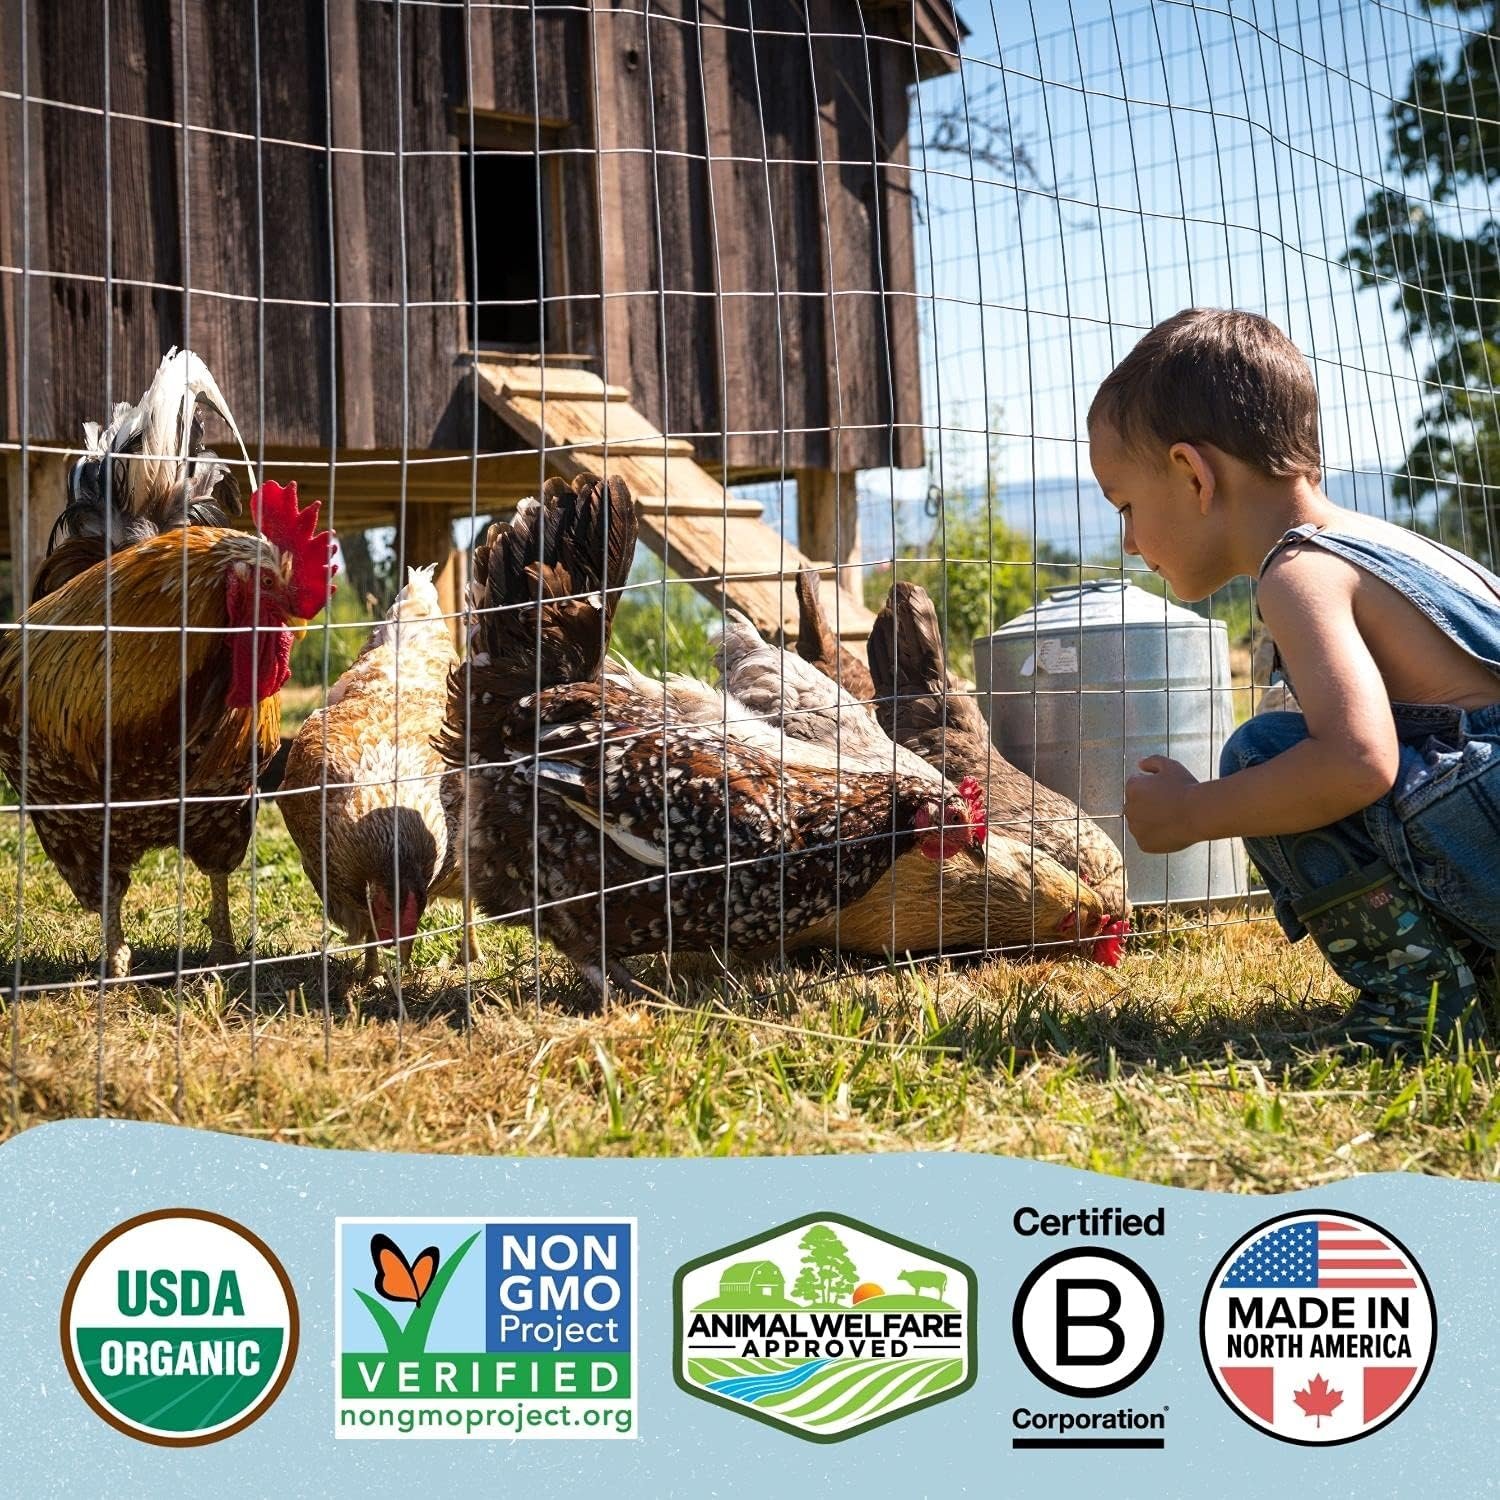 Scratch and Peck Feeds Naturally Free 18% Protein Organic Layer Feed for Chickens and Ducks - Non-GMO Project Verified, Soy Free and Corn Free - 40 lbs